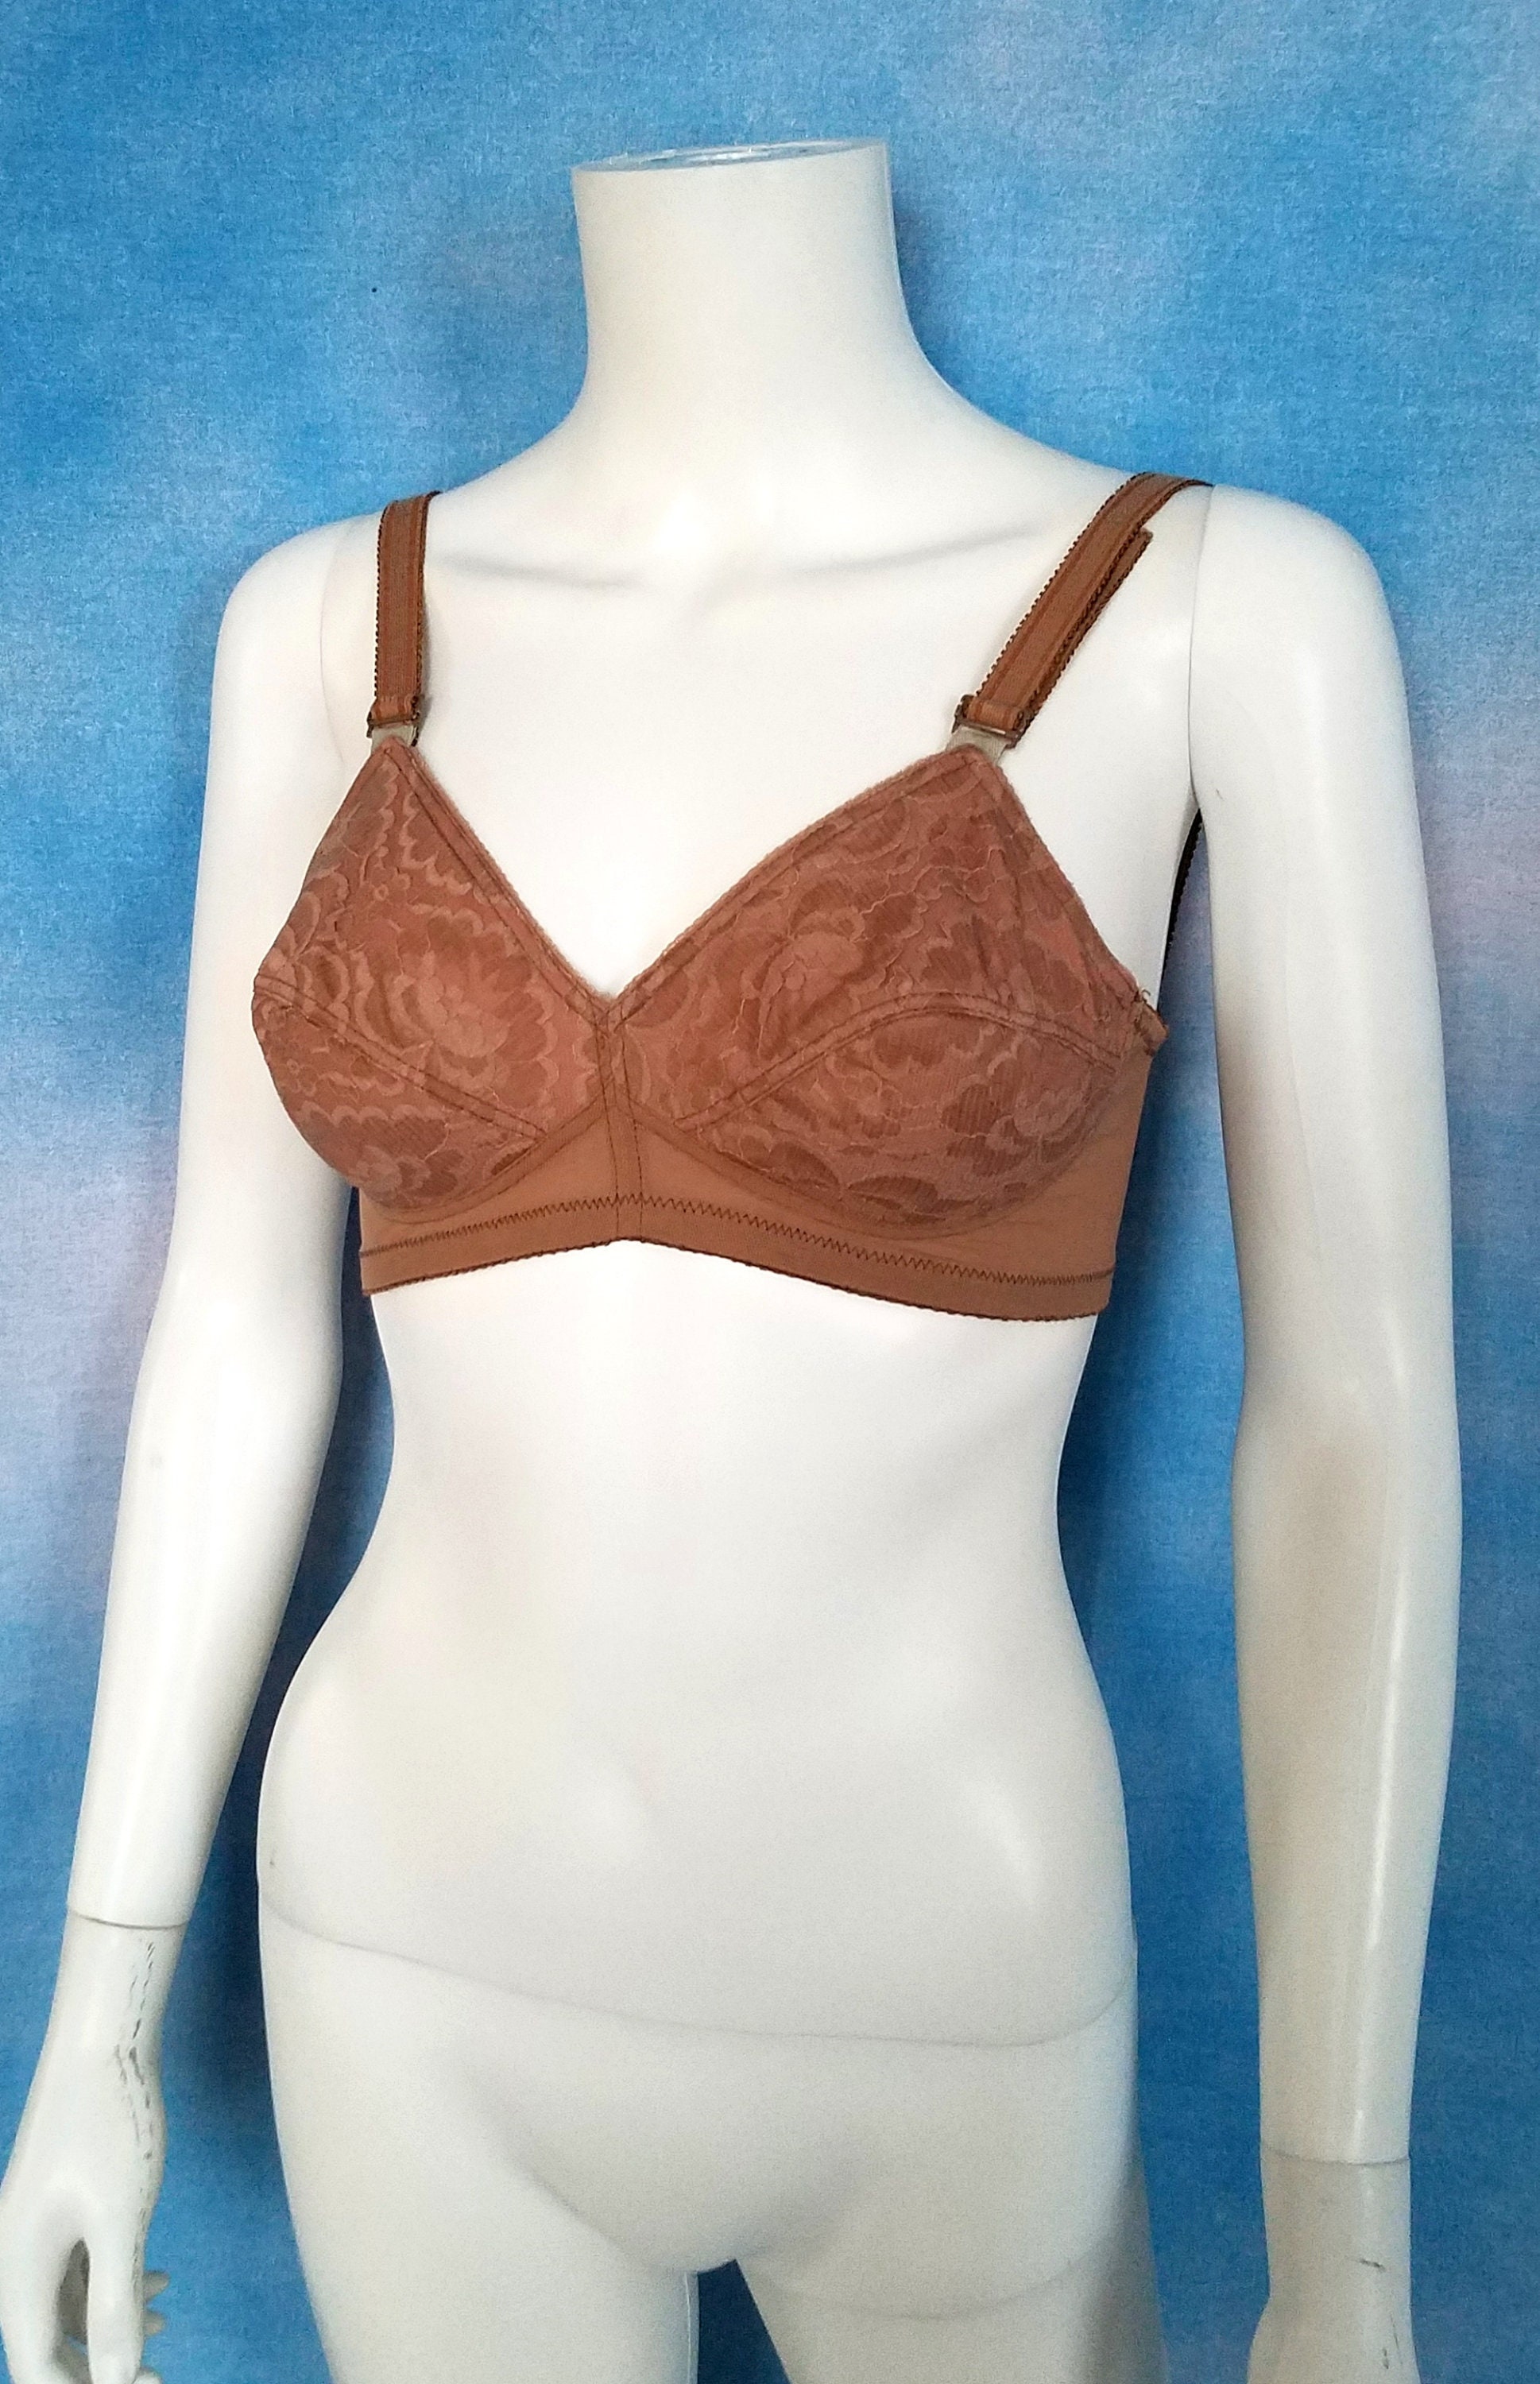 Tan Bra Making Replacement Hook and Eye Tape Closure - 3 Rows - 2 1/4 Wide  - Lingerie Design, DIY Bra Supplies (HE133BN2)